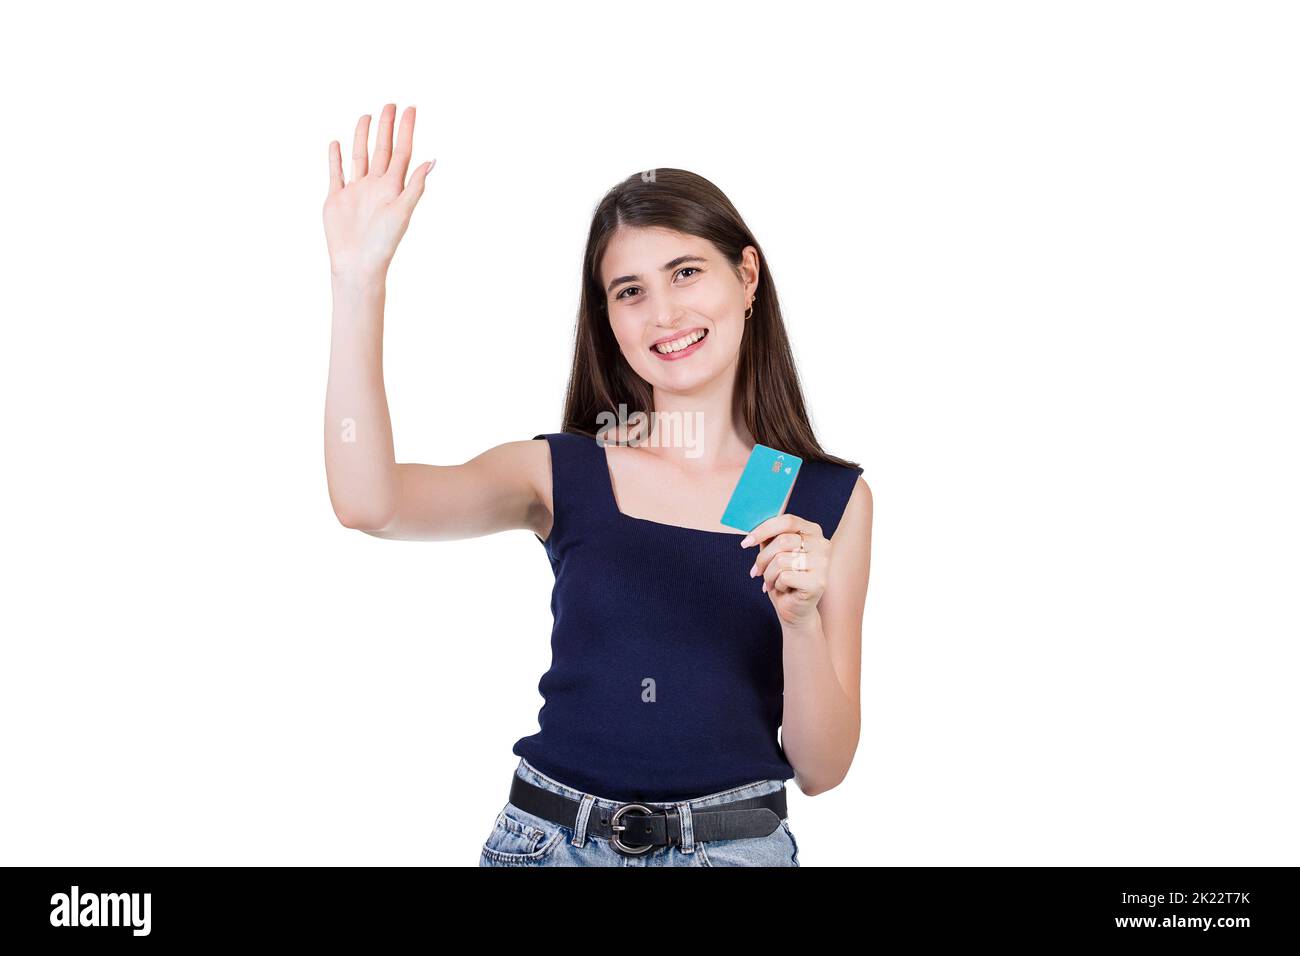 Excited young woman greets lifting hand up, highfive gesture while holding a credit card in hand, isolated on white background with copy space. Girl c Stock Photo